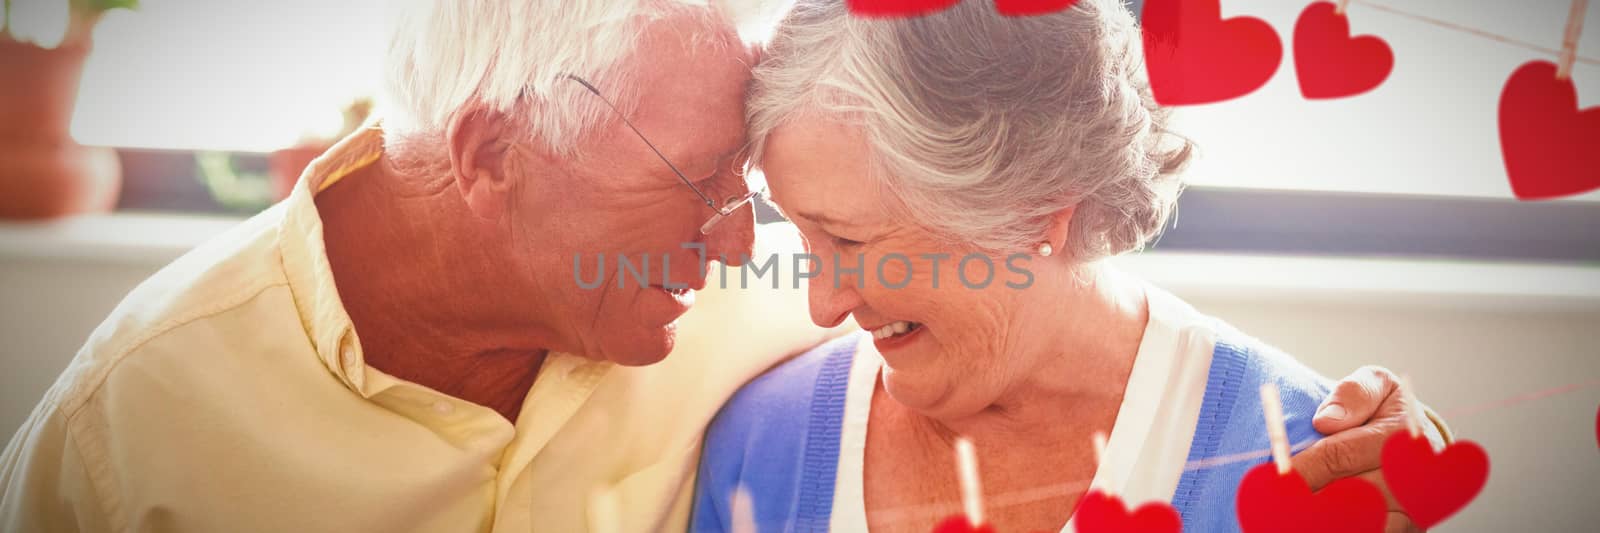 Hearts hanging on a line against senior couple hugging each other